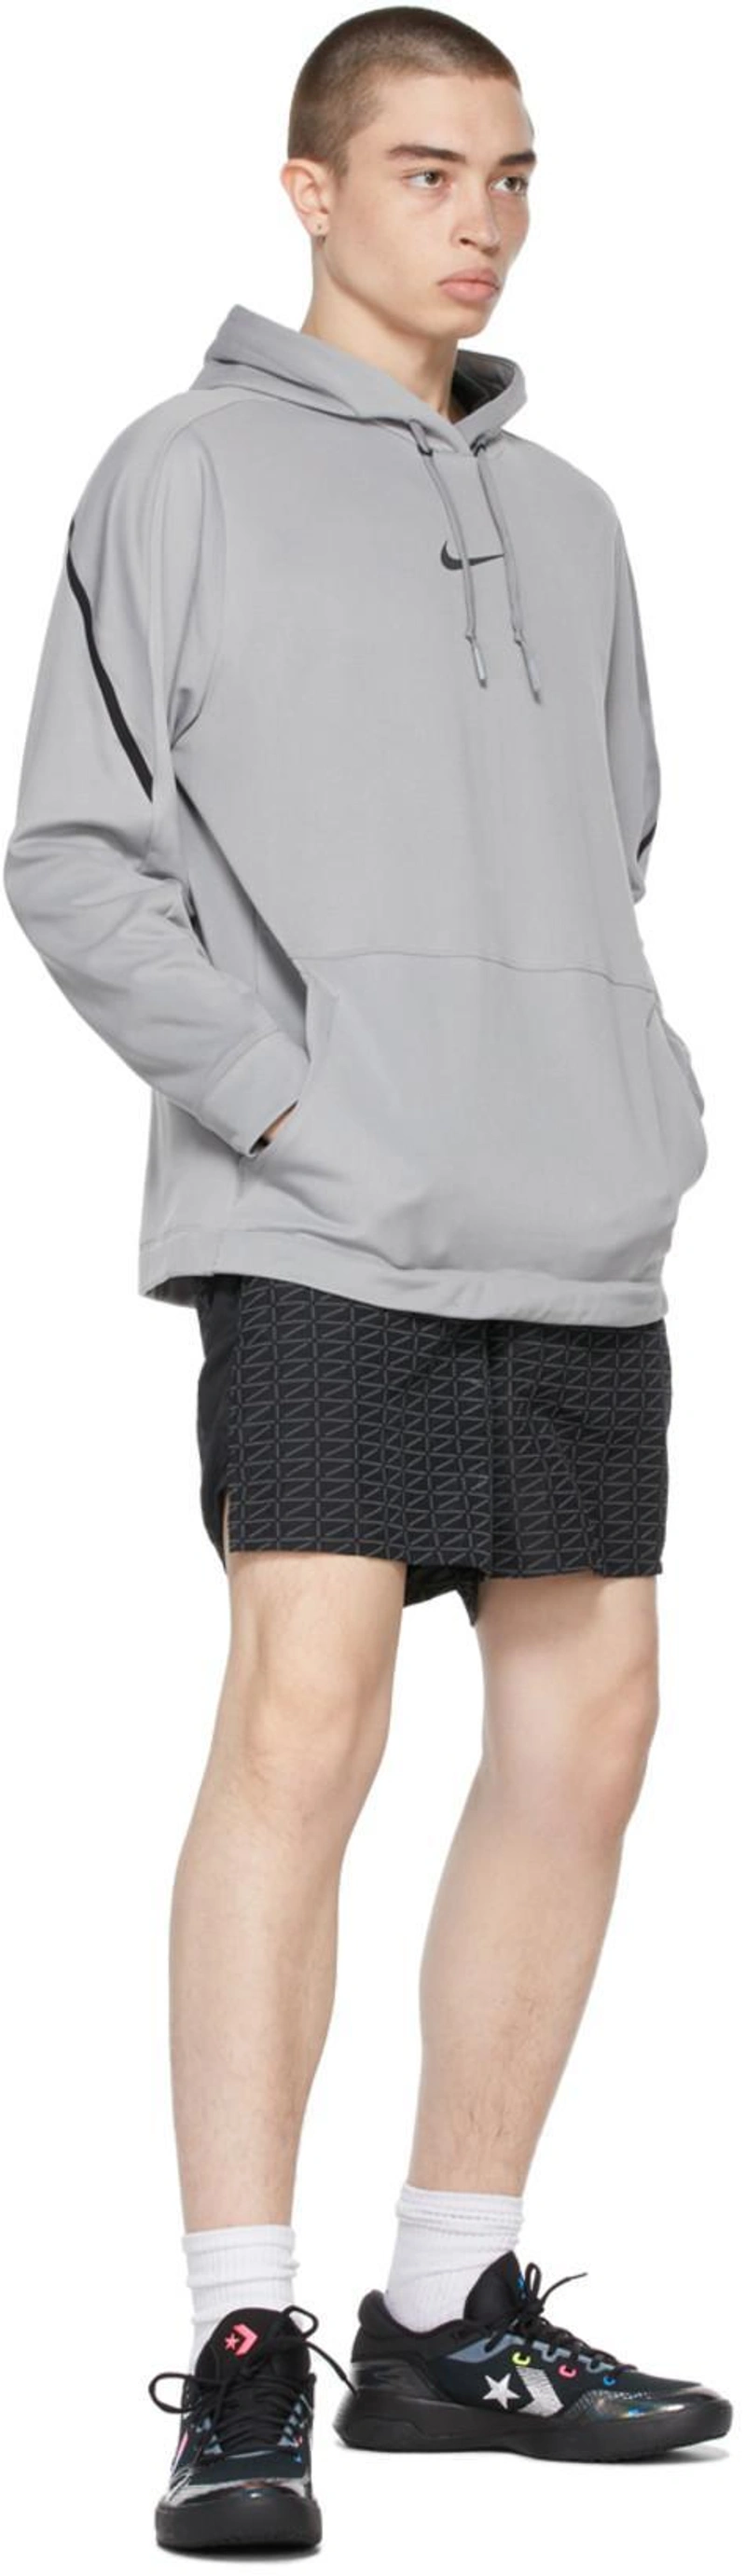 SSENSE's Post | 搭配: Nike Grey & Black Pro Pullover Hoodie In Particle Grey,black；Nike Black Run Logo Shorts In Black/white；Converse Black G4 Low Sneakers In Iridescent